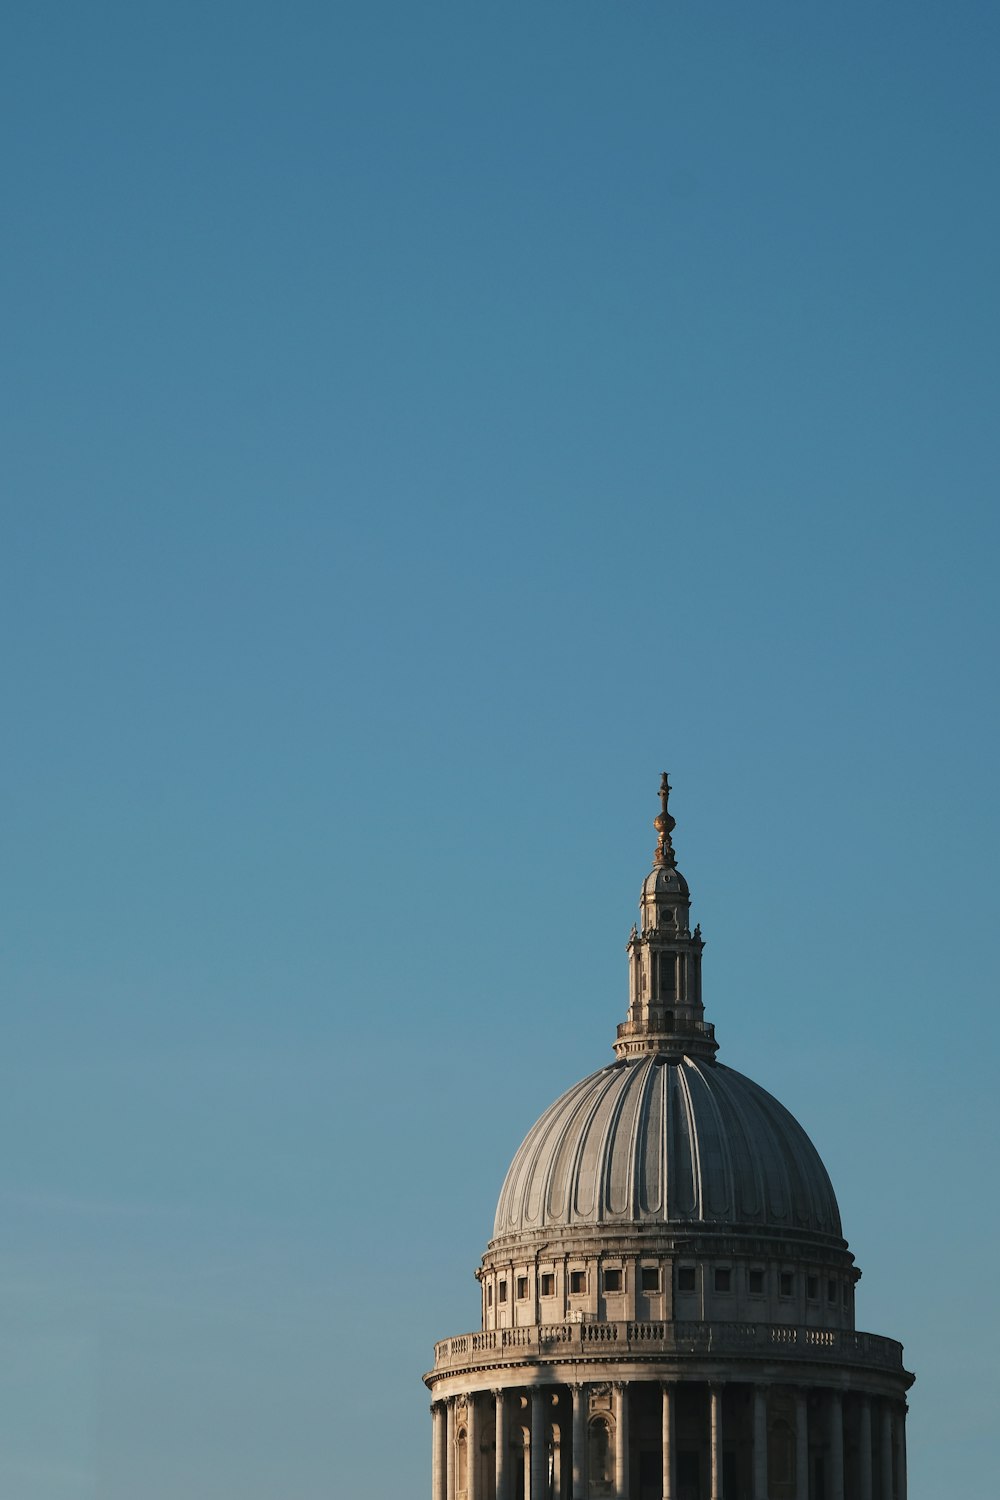 white and brown dome building under blue sky during daytime